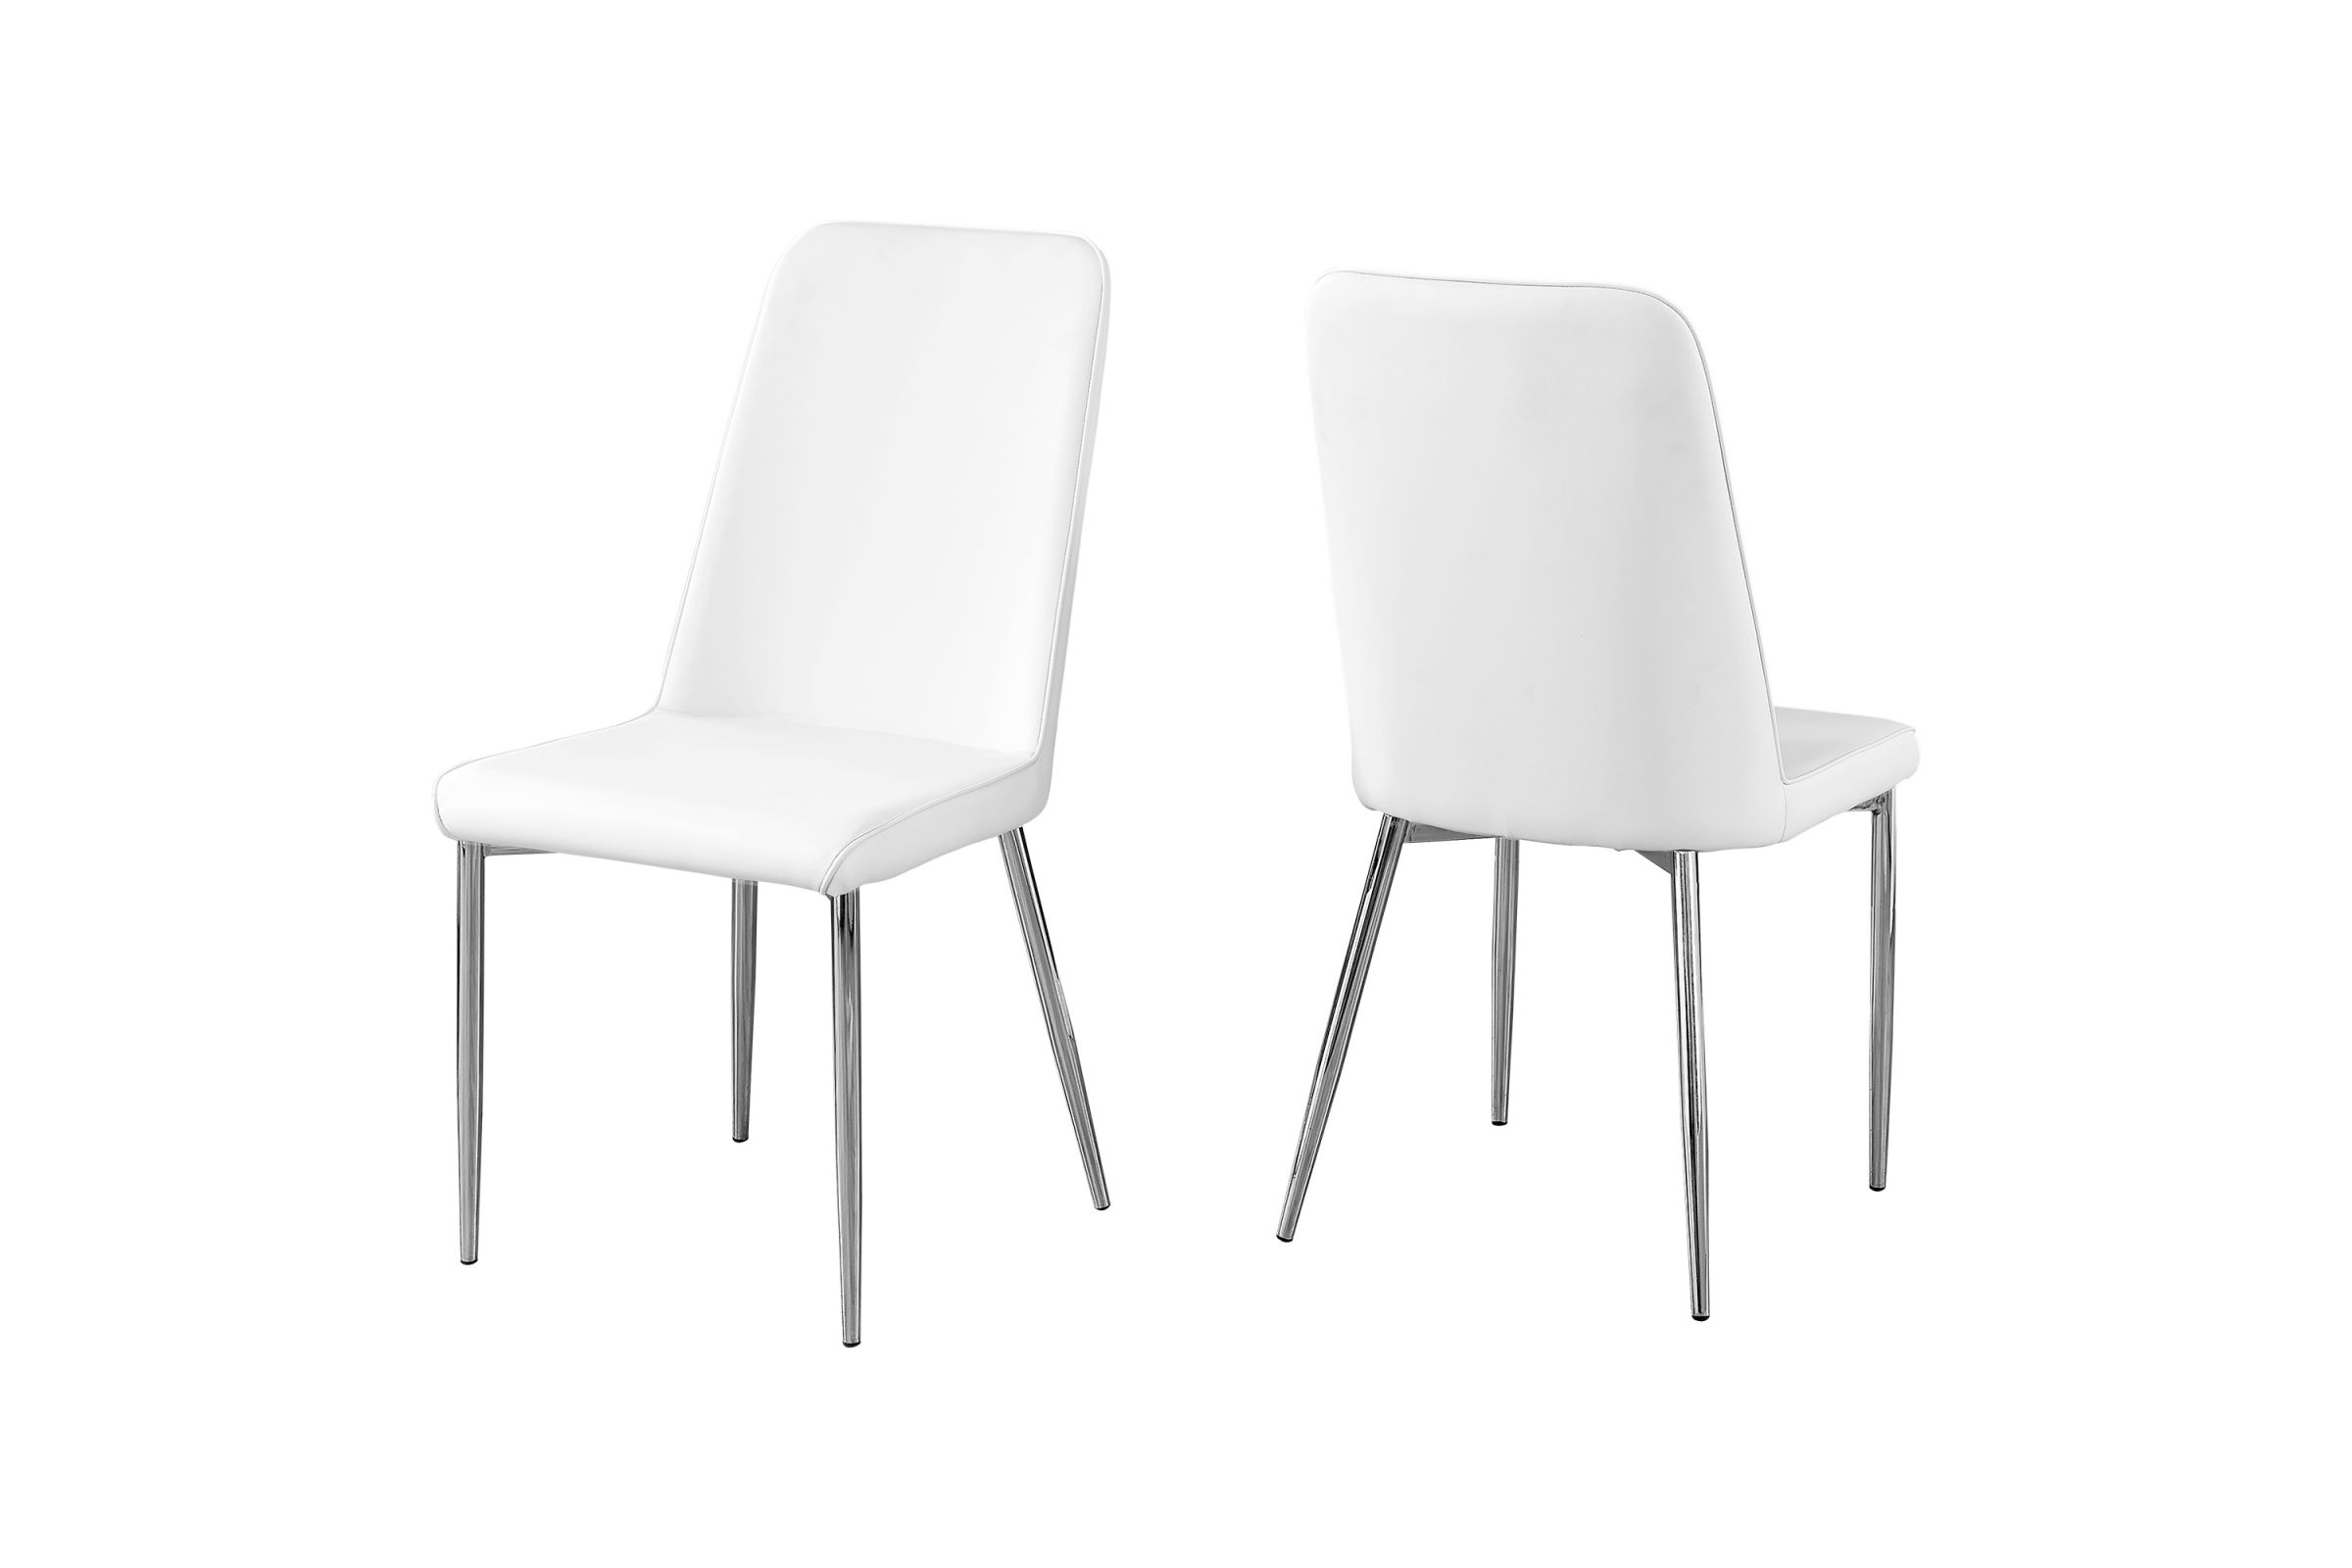 White Faux Leather Dining Chair - Set of 2